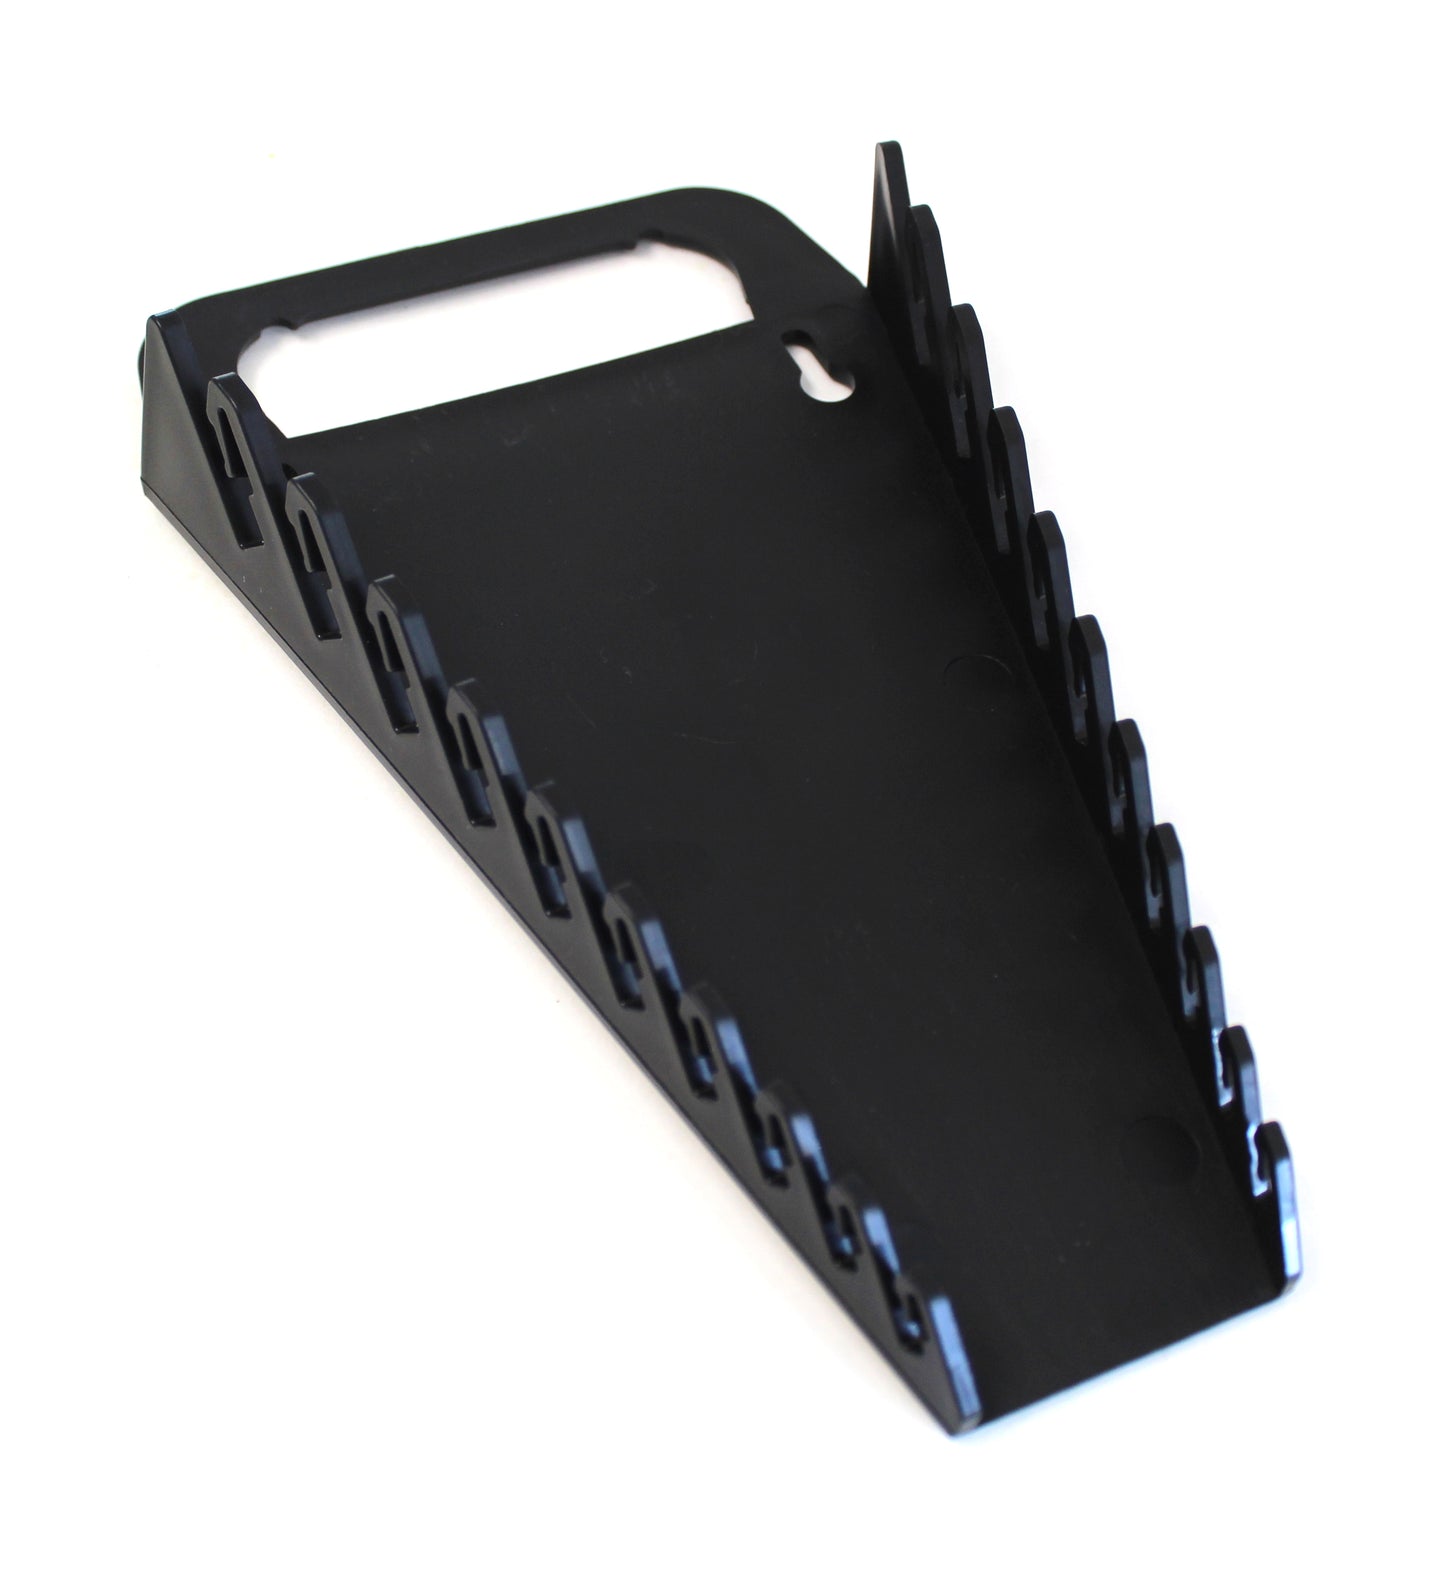 10-Tool Plastic Portable Wrench Gripper Organizer Holder Tray